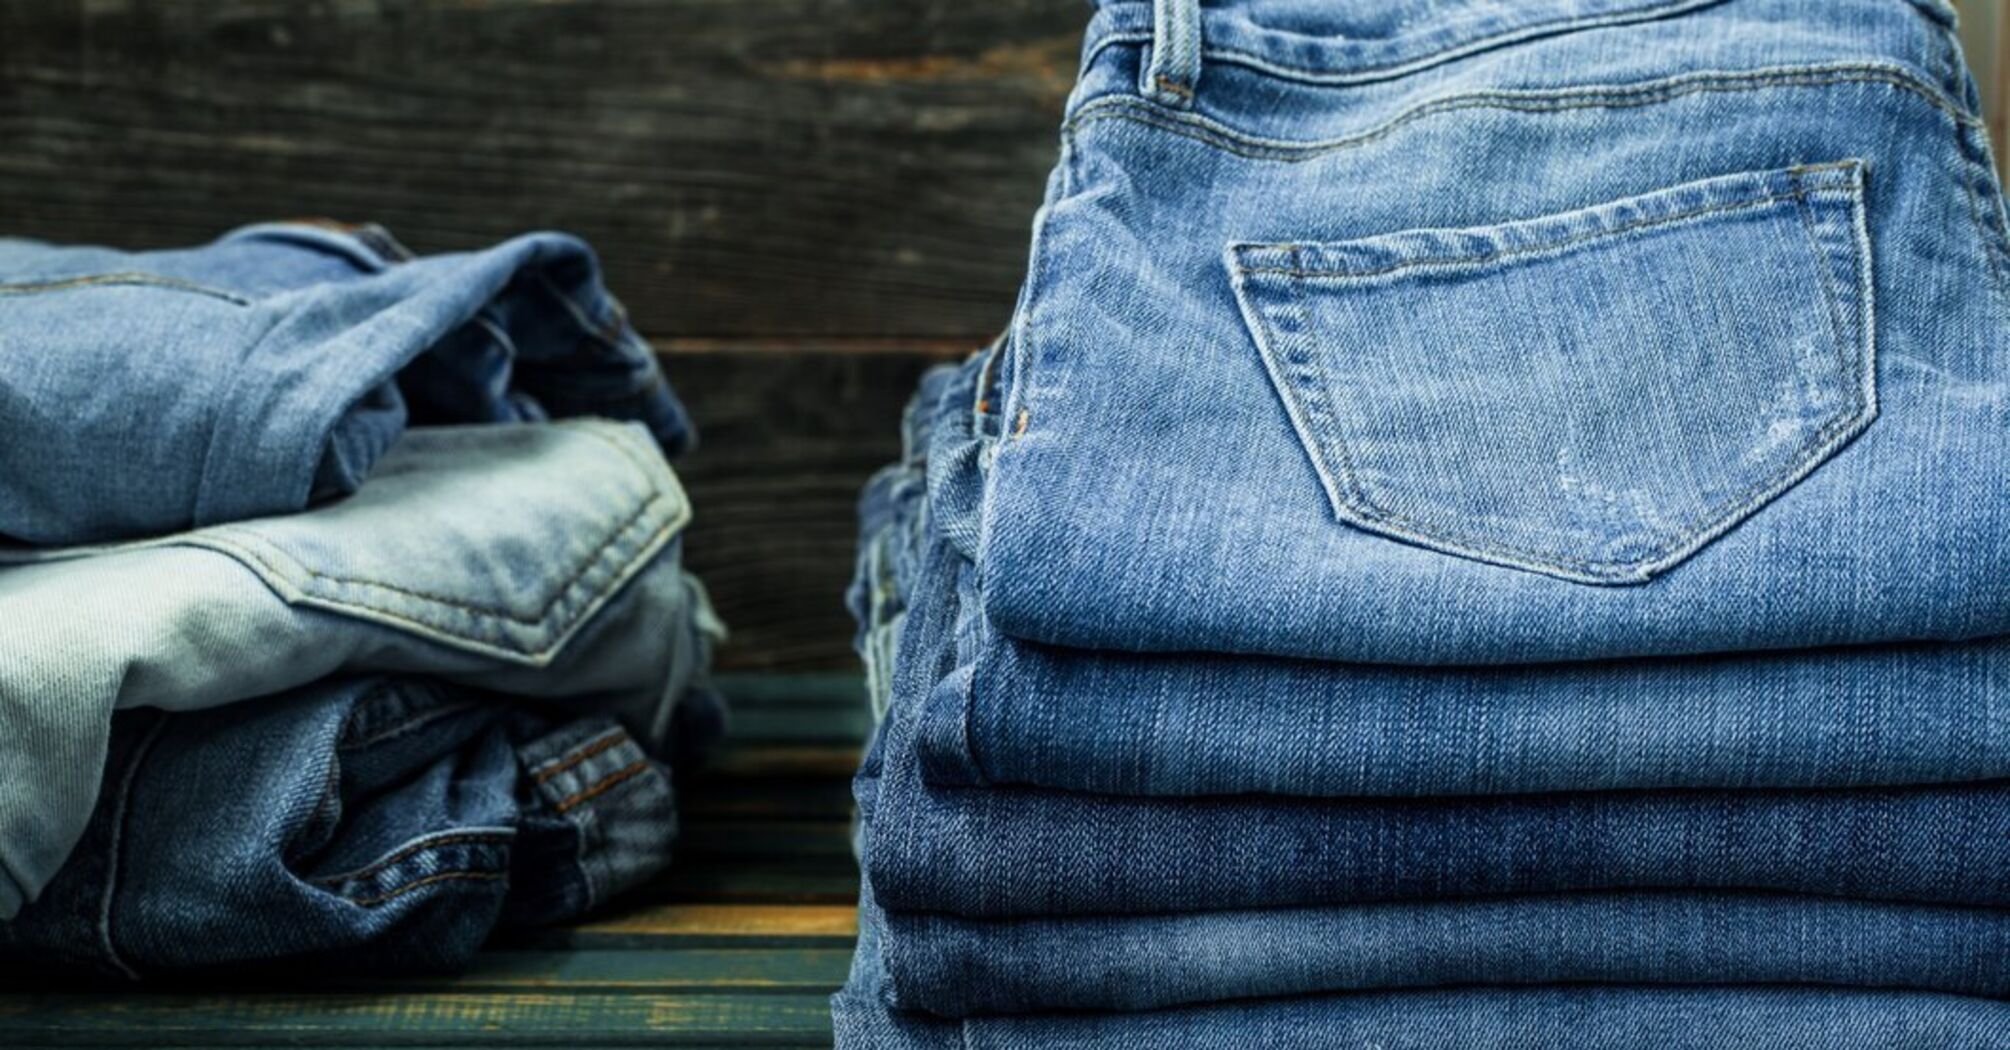 How to wash jeans properly: 4 tips from the experts